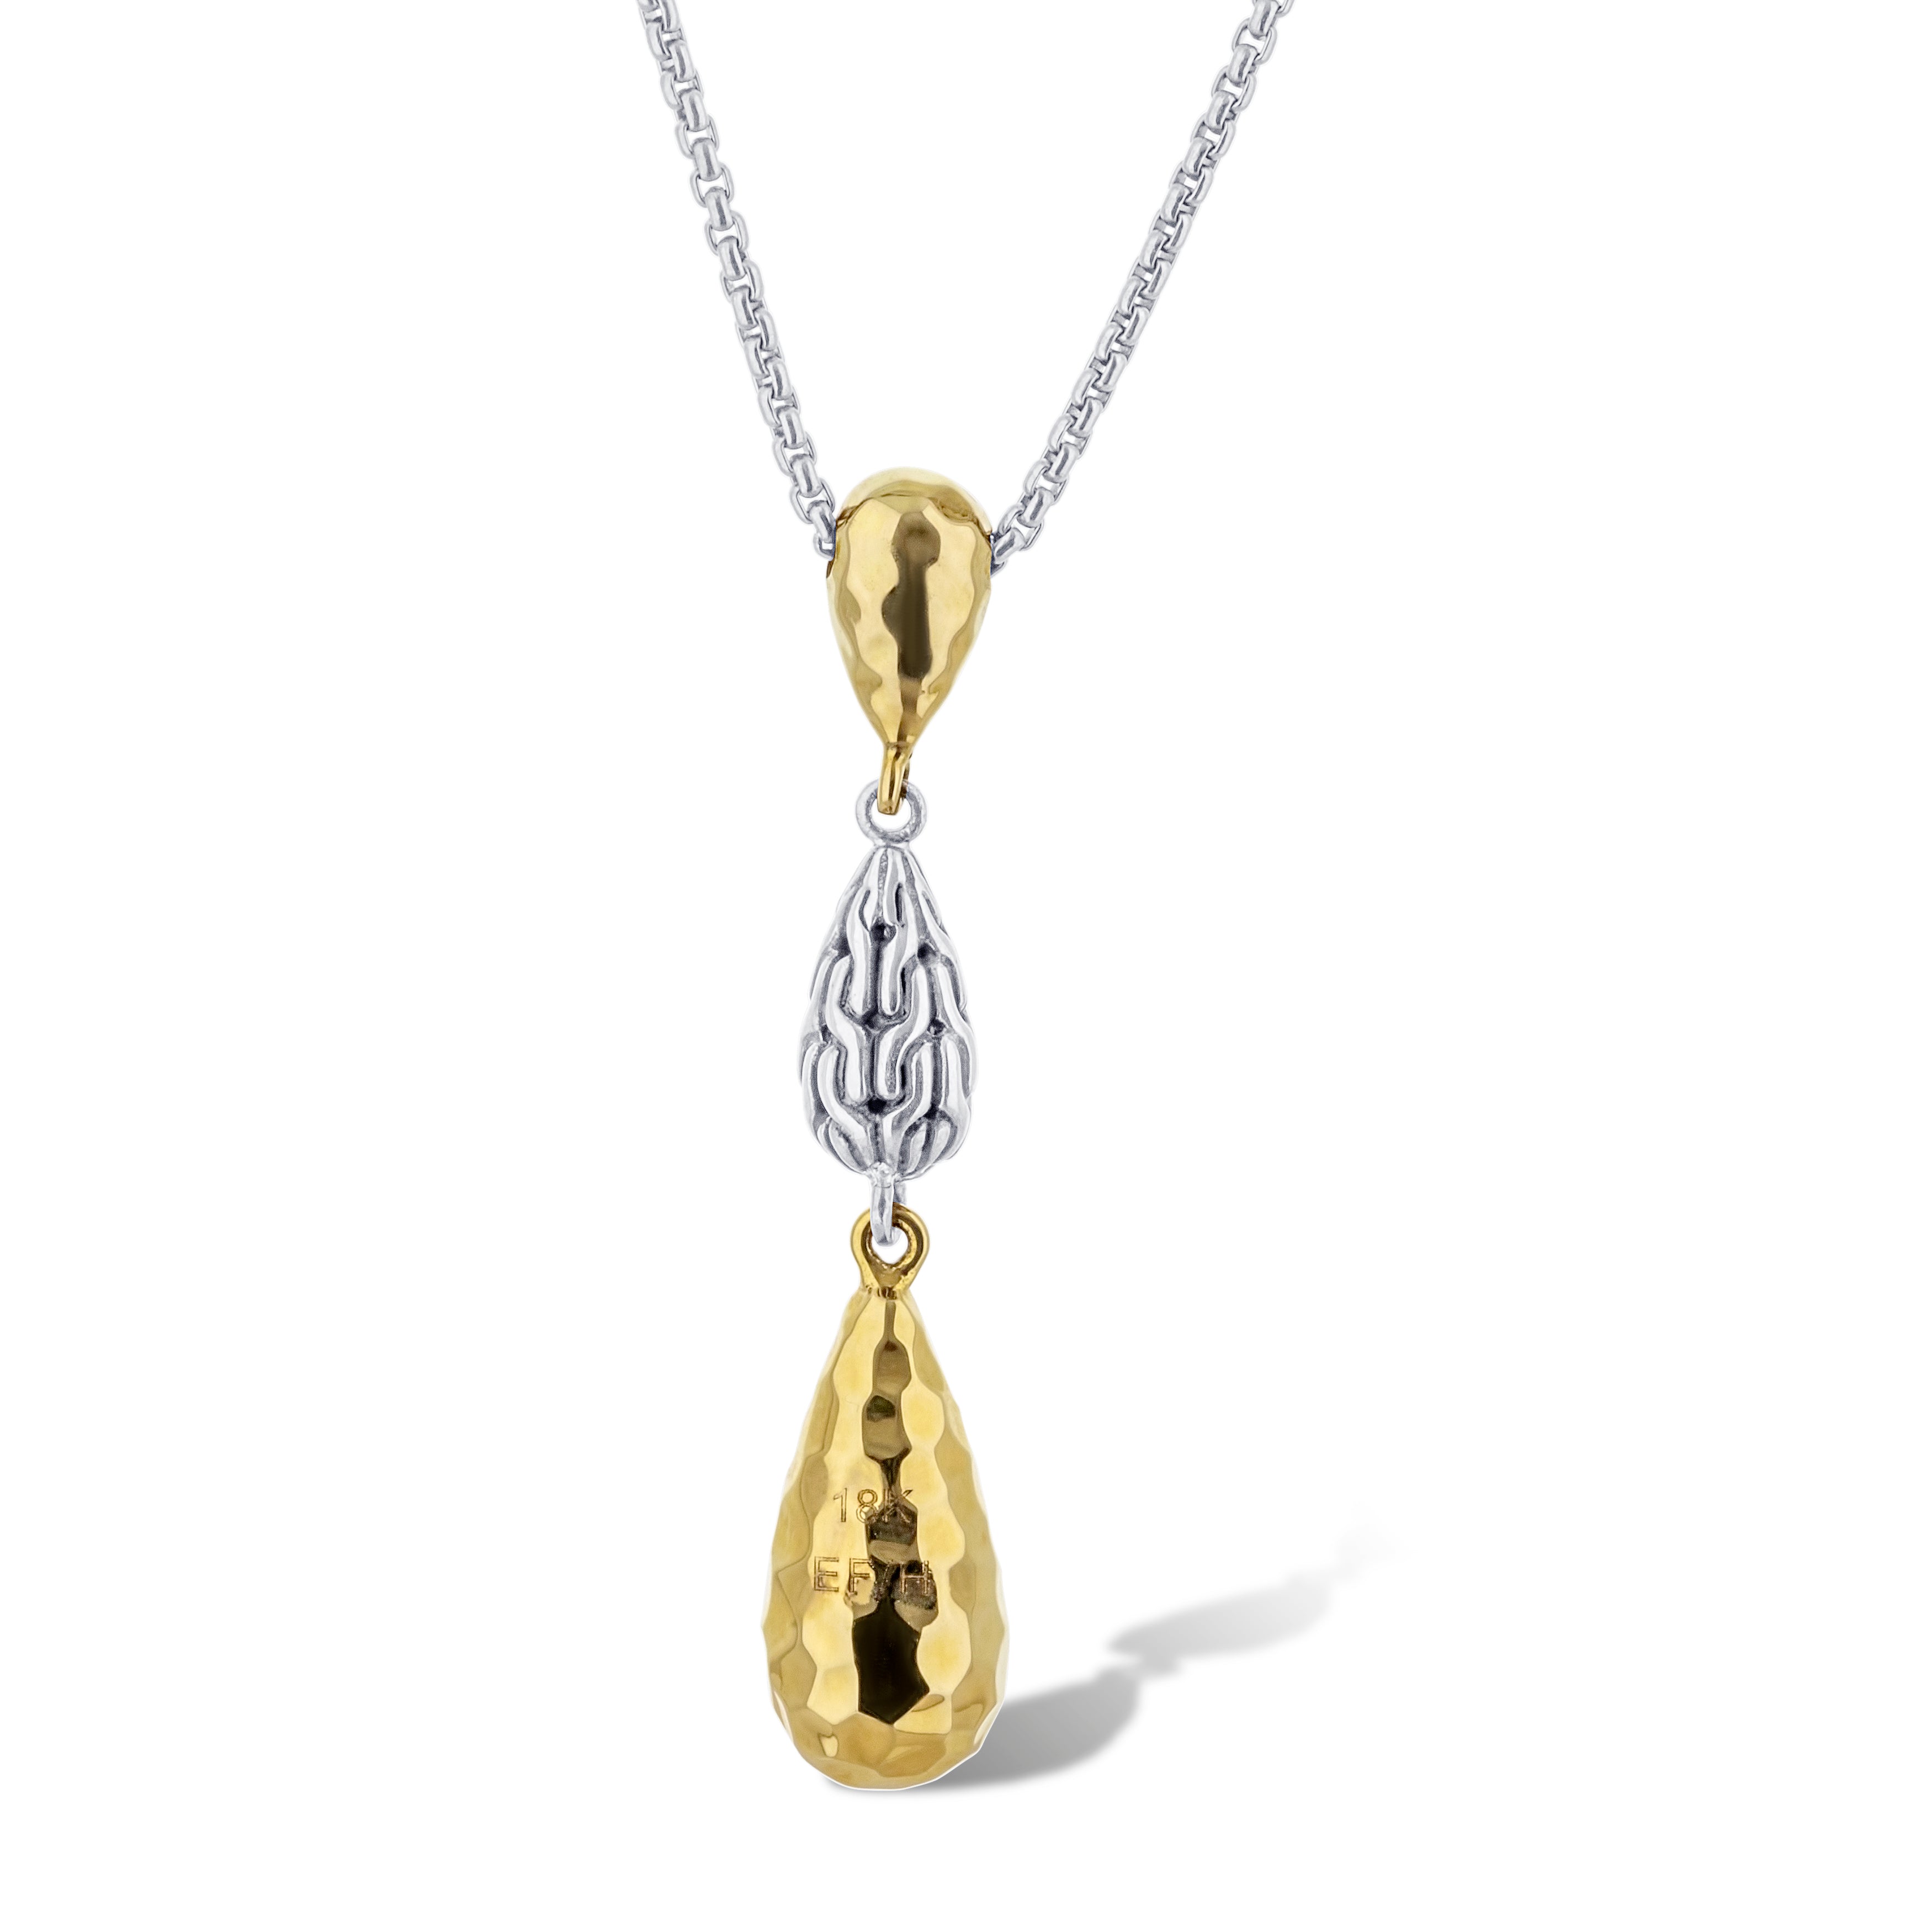 Silver & 18K Yellow Gold Classic Hammered Pendant with Chain Necklace